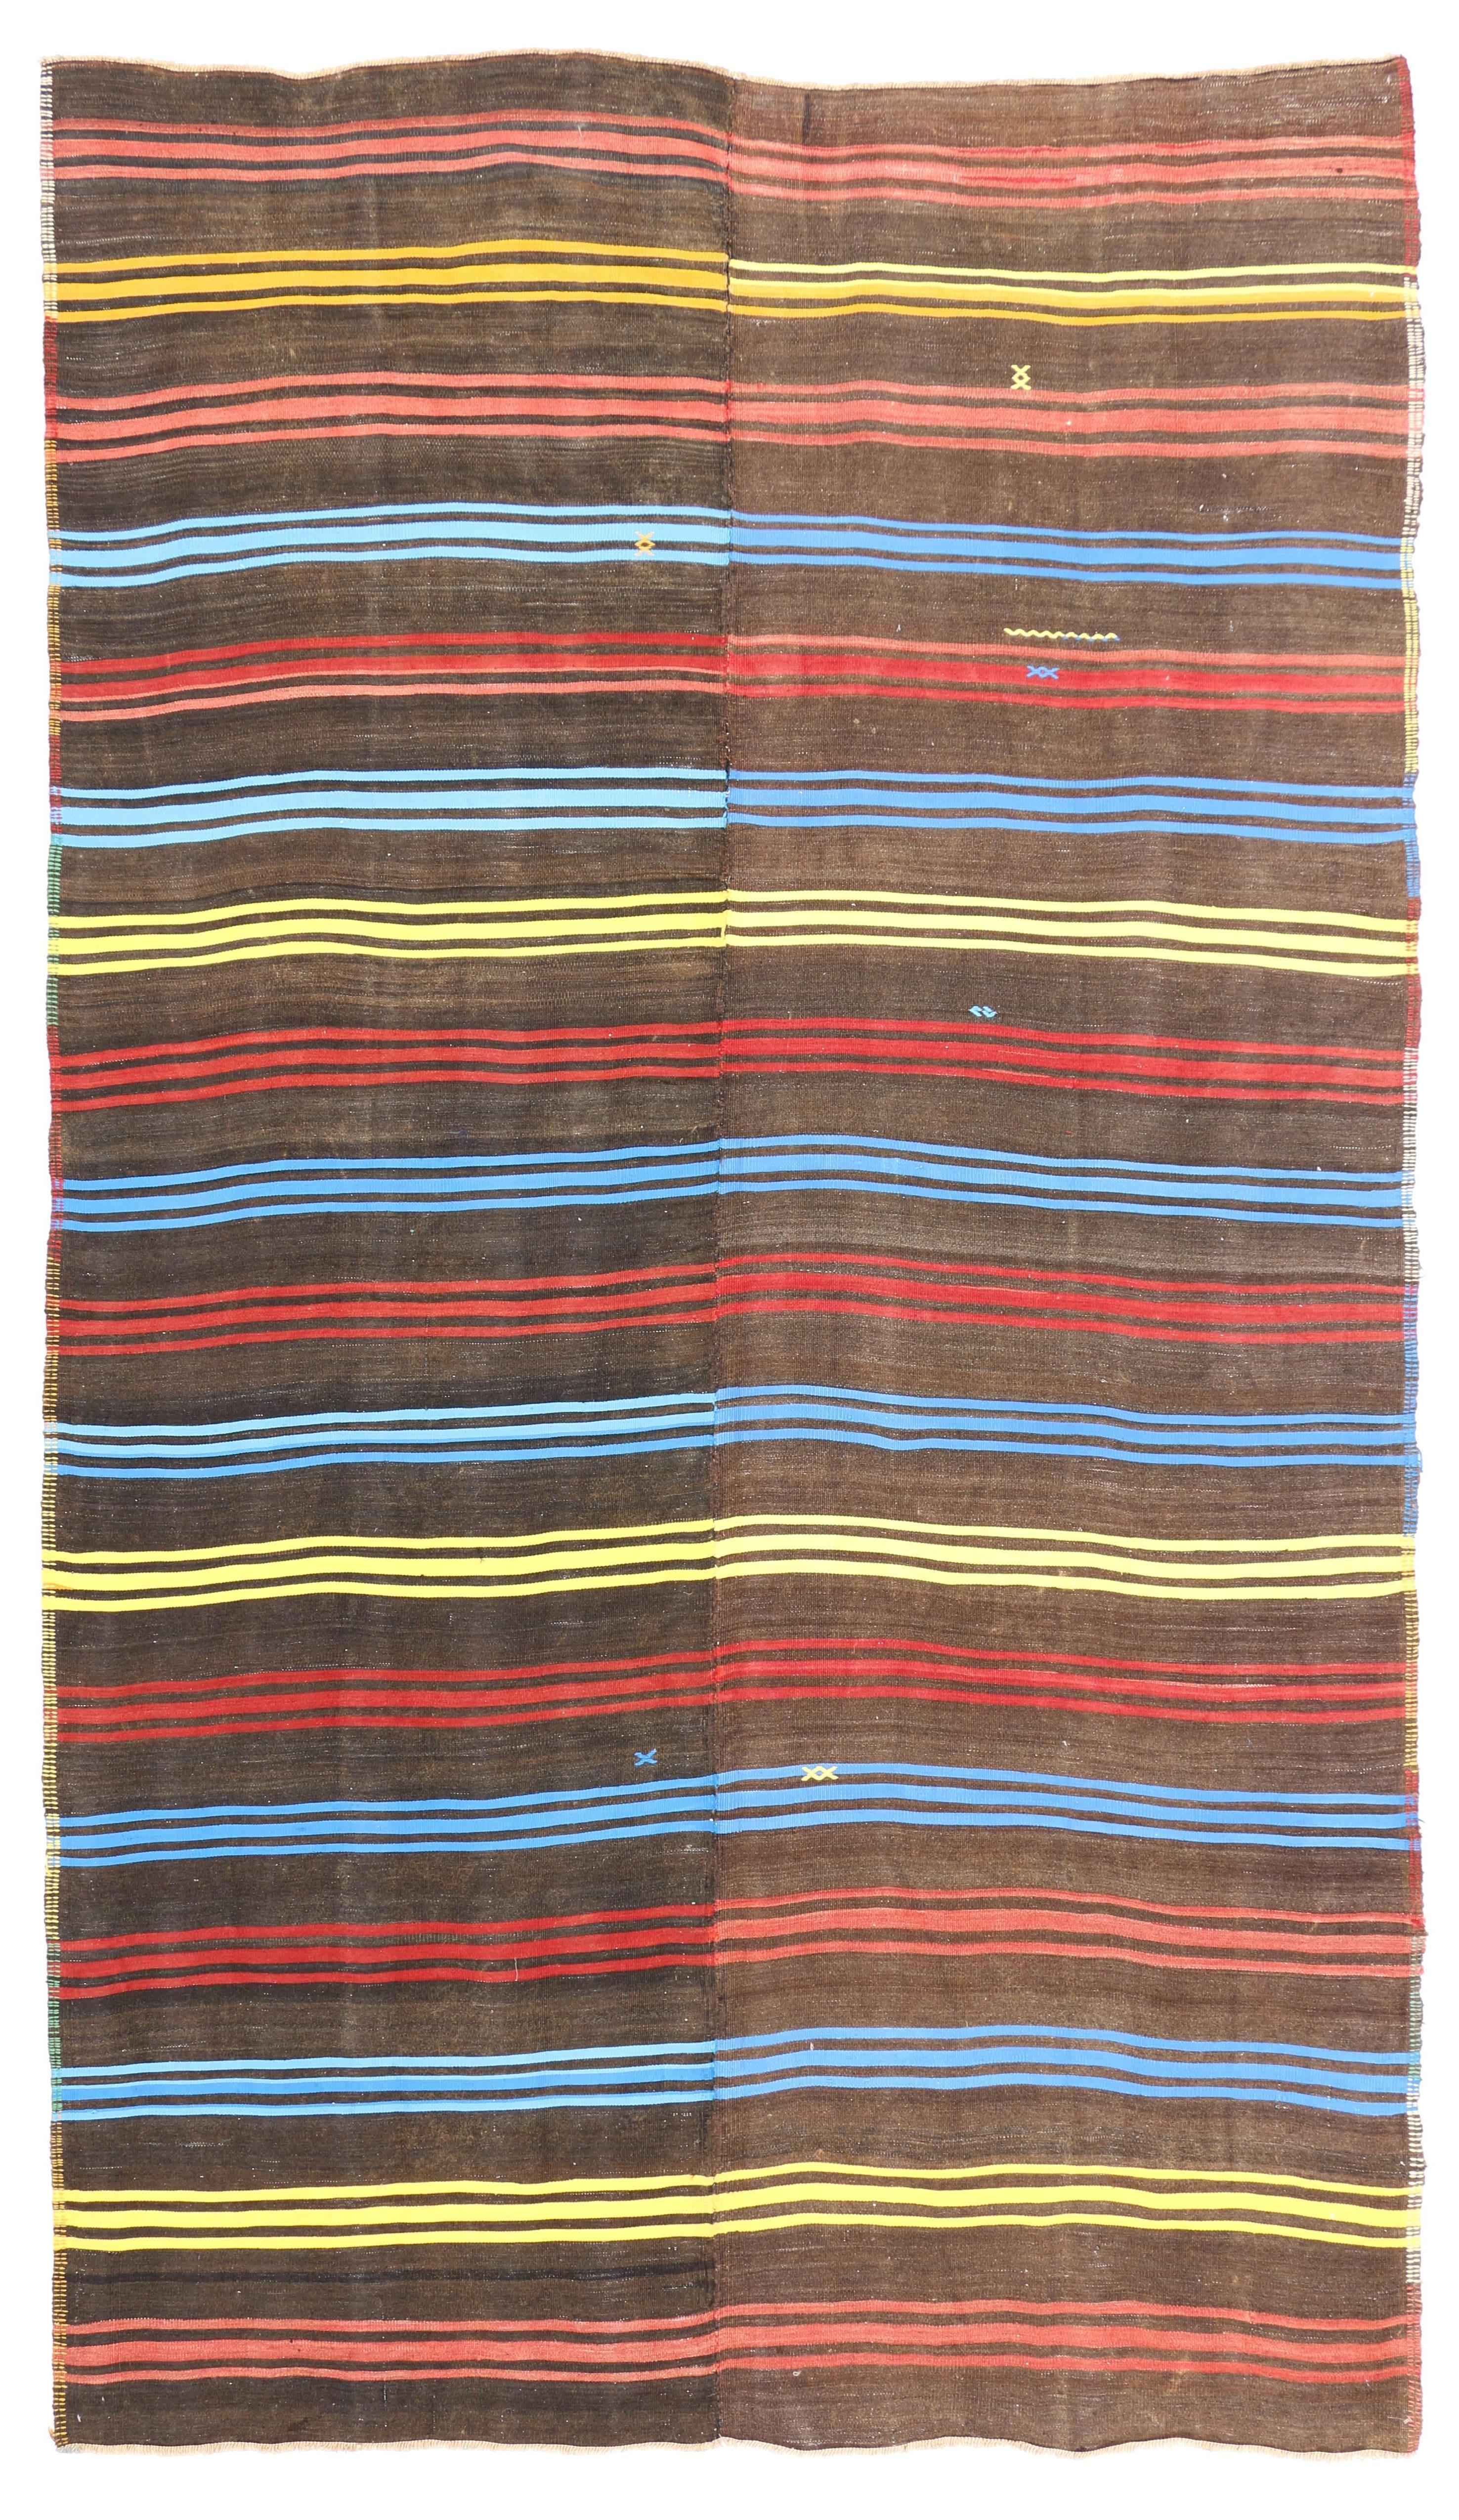 51072 Vintage Turkish Kilim Rug with Colorful Bayadere Stripes with Modern Cabin Style. Create a comfortable and modern setting with this hand-woven wool vintage Turkish Kilim rug. The flat-weave kilim rug features a variety of colorful Bayadere